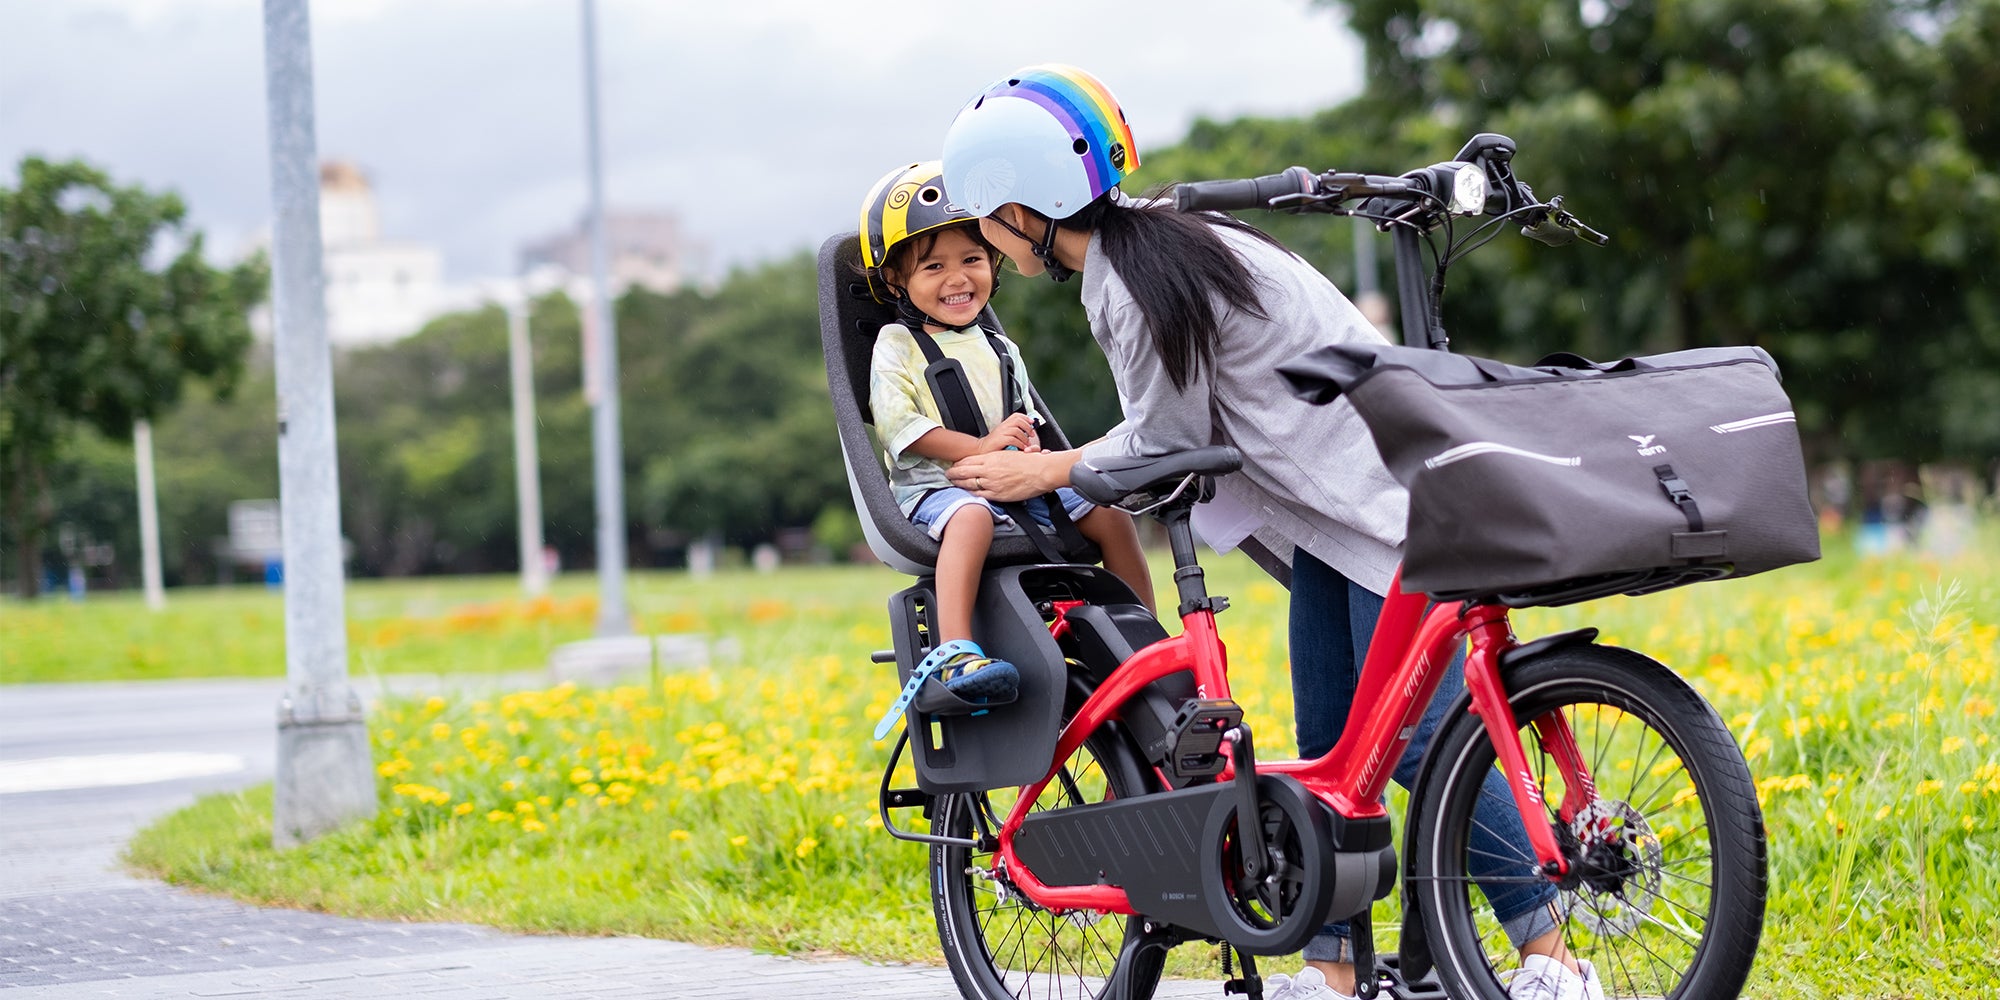 Woman secures child in seat on back of Tern NBD e-bike